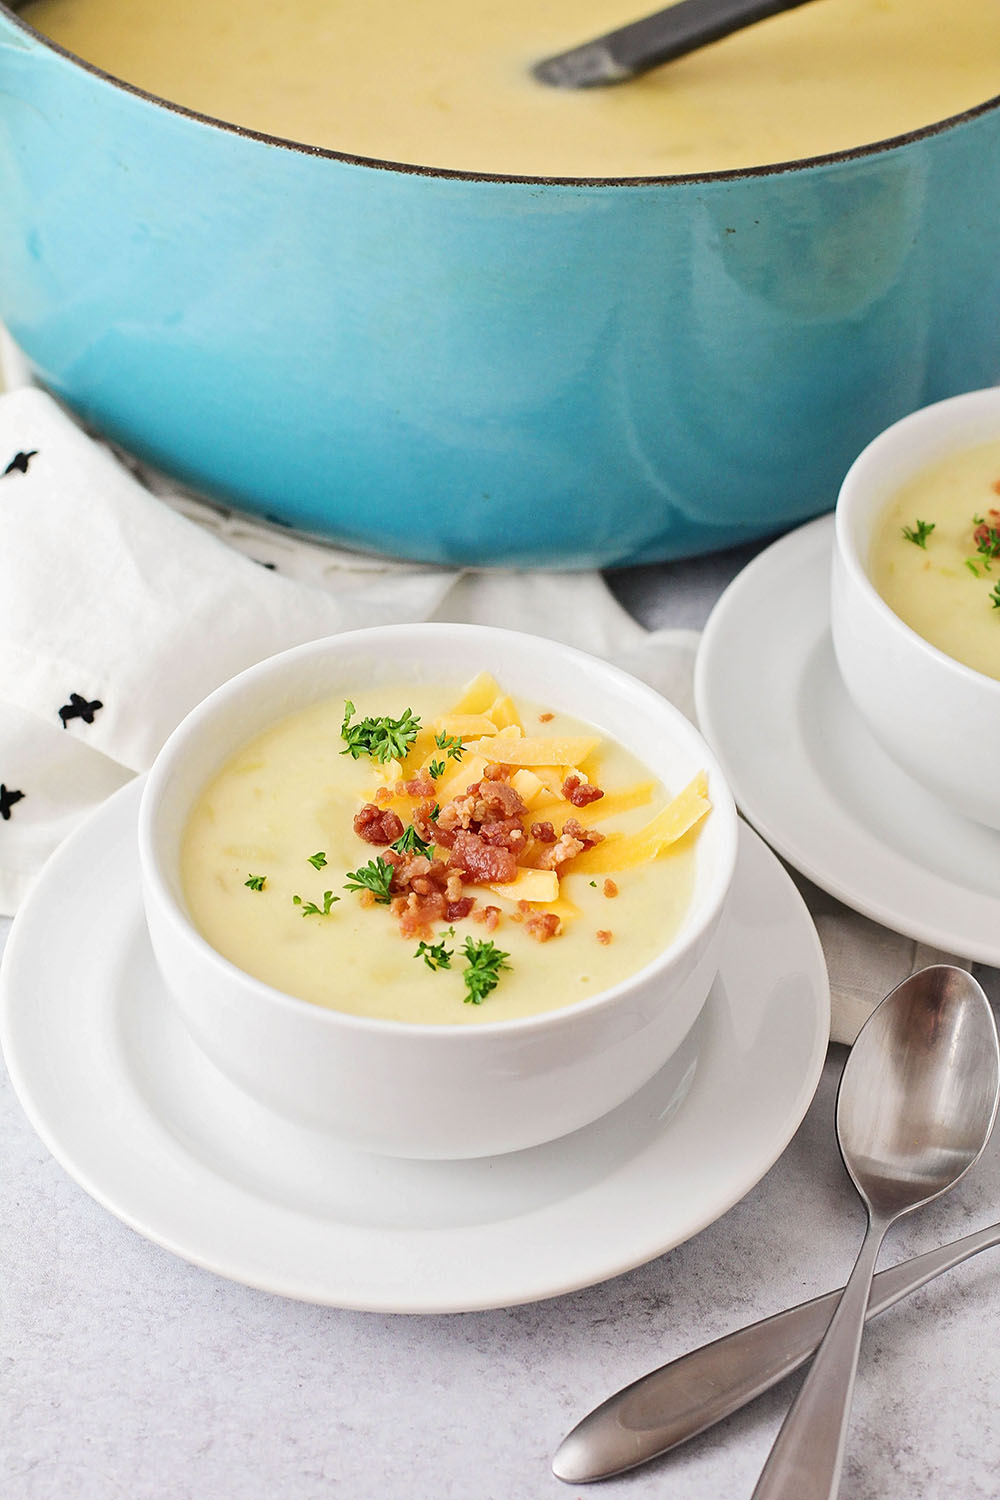 This creamy potato leek soup is the perfect comfort food meal! It's so delicious and flavorful, and easy to make!